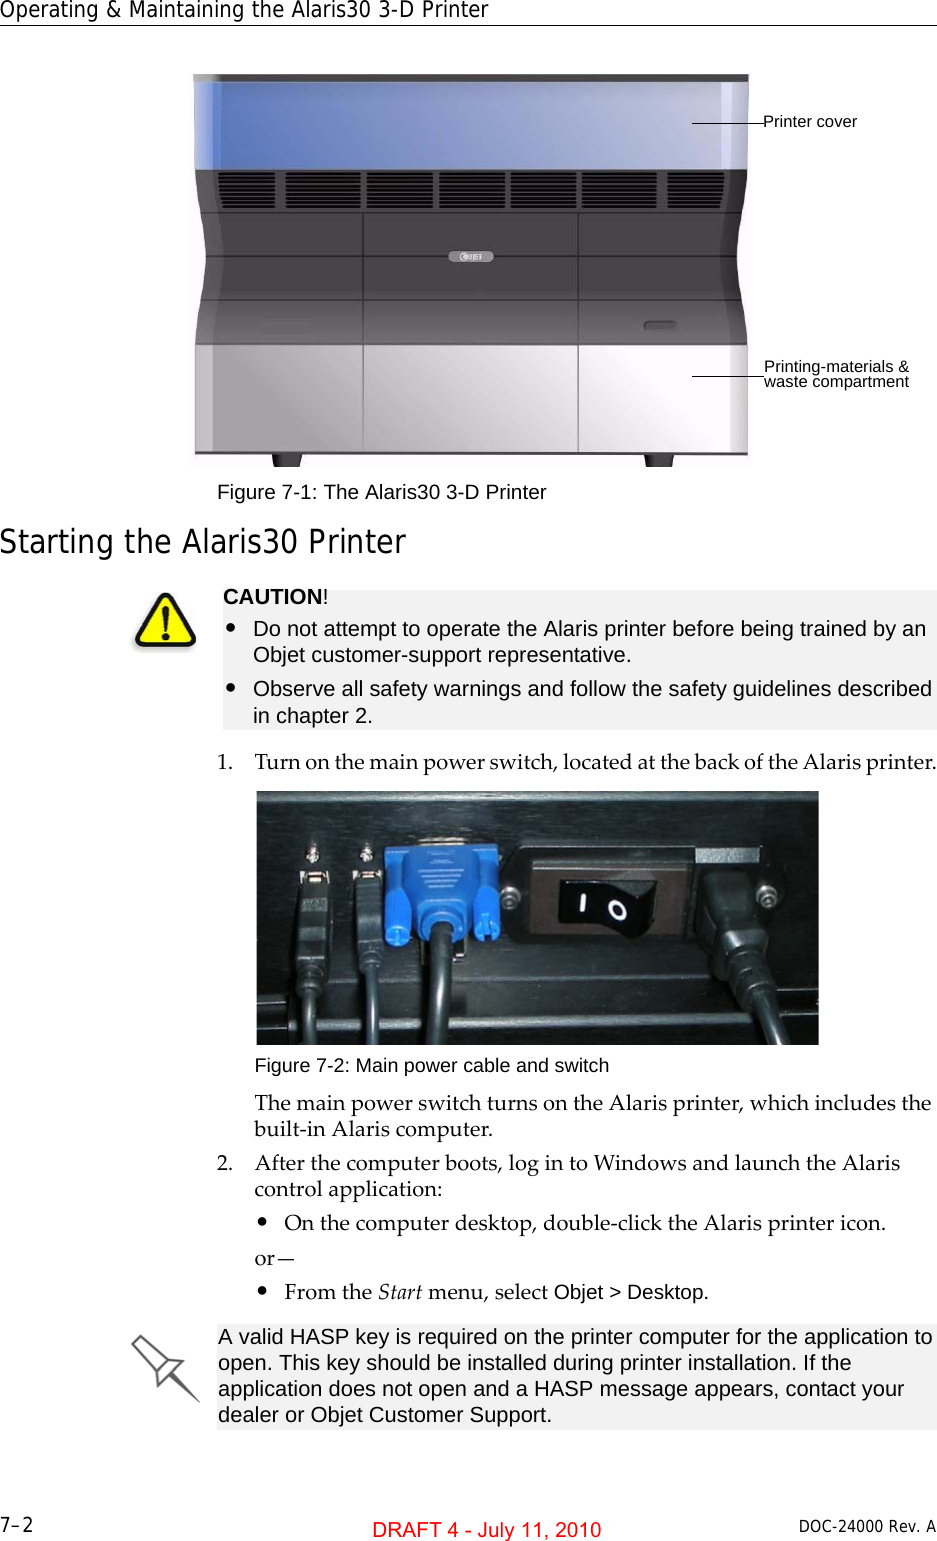 Operating &amp; Maintaining the Alaris30 3-D Printer7–2 DOC-24000 Rev. AFigure 7-1: The Alaris30 3-D Printer Starting the Alaris30 Printer1. Turnonthemainpowerswitch,locatedatthebackoftheAlarisprinter.Figure 7-2: Main power cable and switchThemainpowerswitchturnsontheAlarisprinter,whichincludesthebuilt‐inAlariscomputer.2. Afterthecomputerboots,logintoWindowsandlaunchtheAlariscontrolapplication:•Onthecomputerdesktop,double‐clicktheAlarisprintericon.or—•FromtheStartmenu,selectObjet &gt; Desktop.Printer coverPrinting-materials &amp; waste compartmentCAUTION!•Do not attempt to operate the Alaris printer before being trained by an Objet customer-support representative.•Observe all safety warnings and follow the safety guidelines described in chapter 2.A valid HASP key is required on the printer computer for the application to open. This key should be installed during printer installation. If the application does not open and a HASP message appears, contact your dealer or Objet Customer Support.DRAFT 4 - July 11, 2010